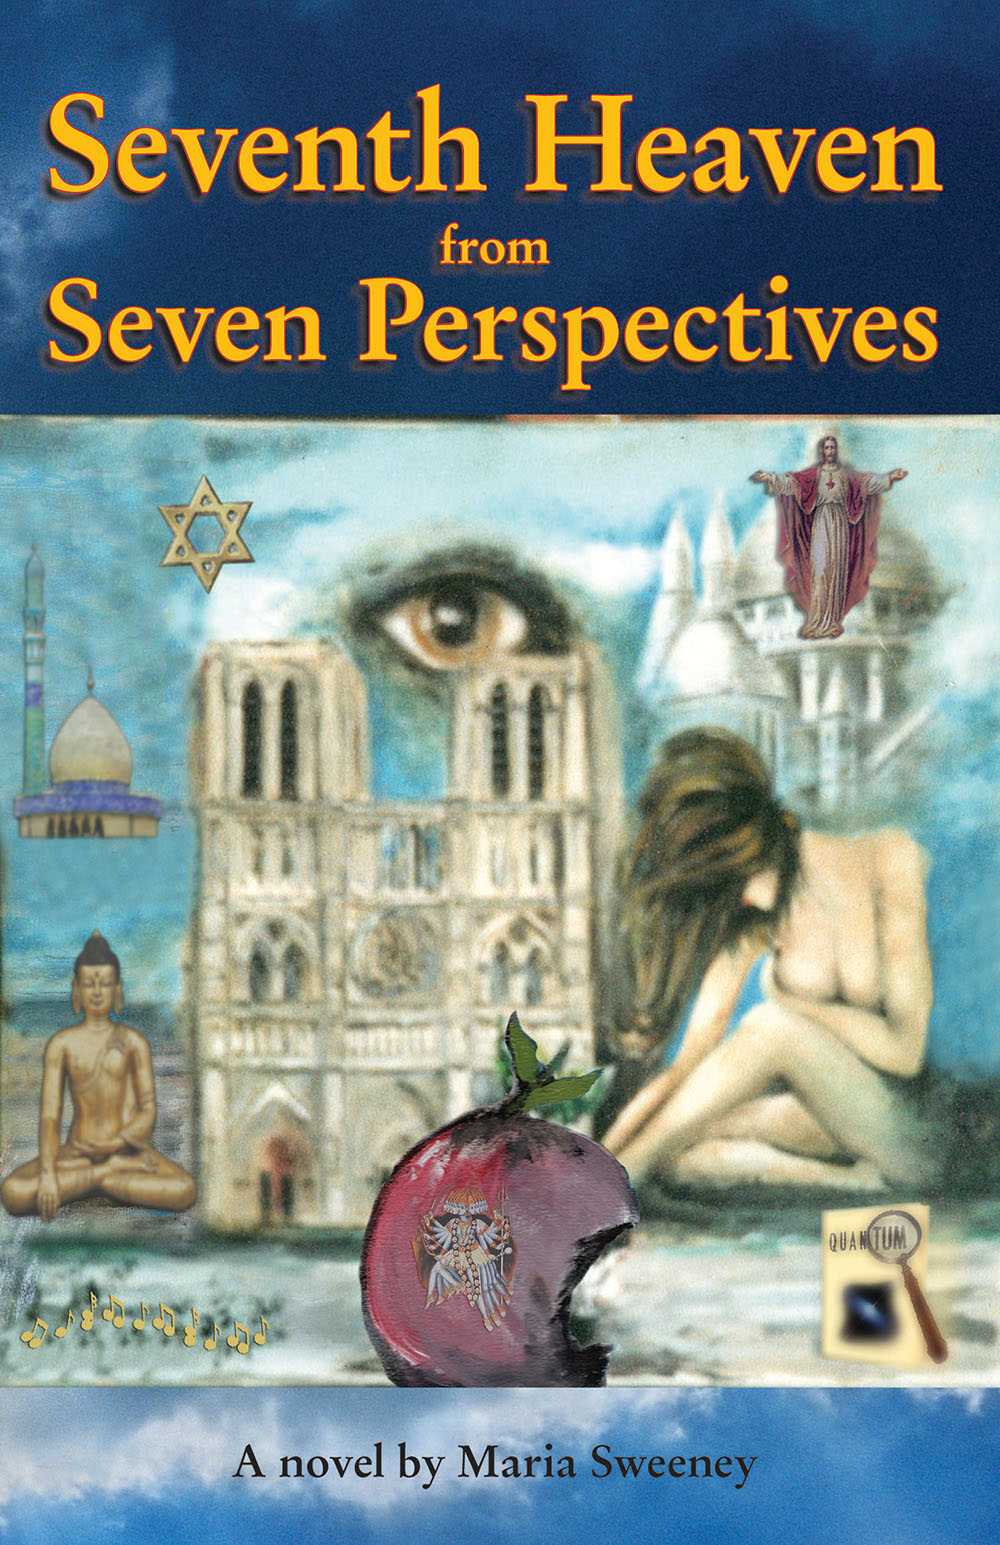 The front cover of Seventh Heaven from Seven Perspectives.